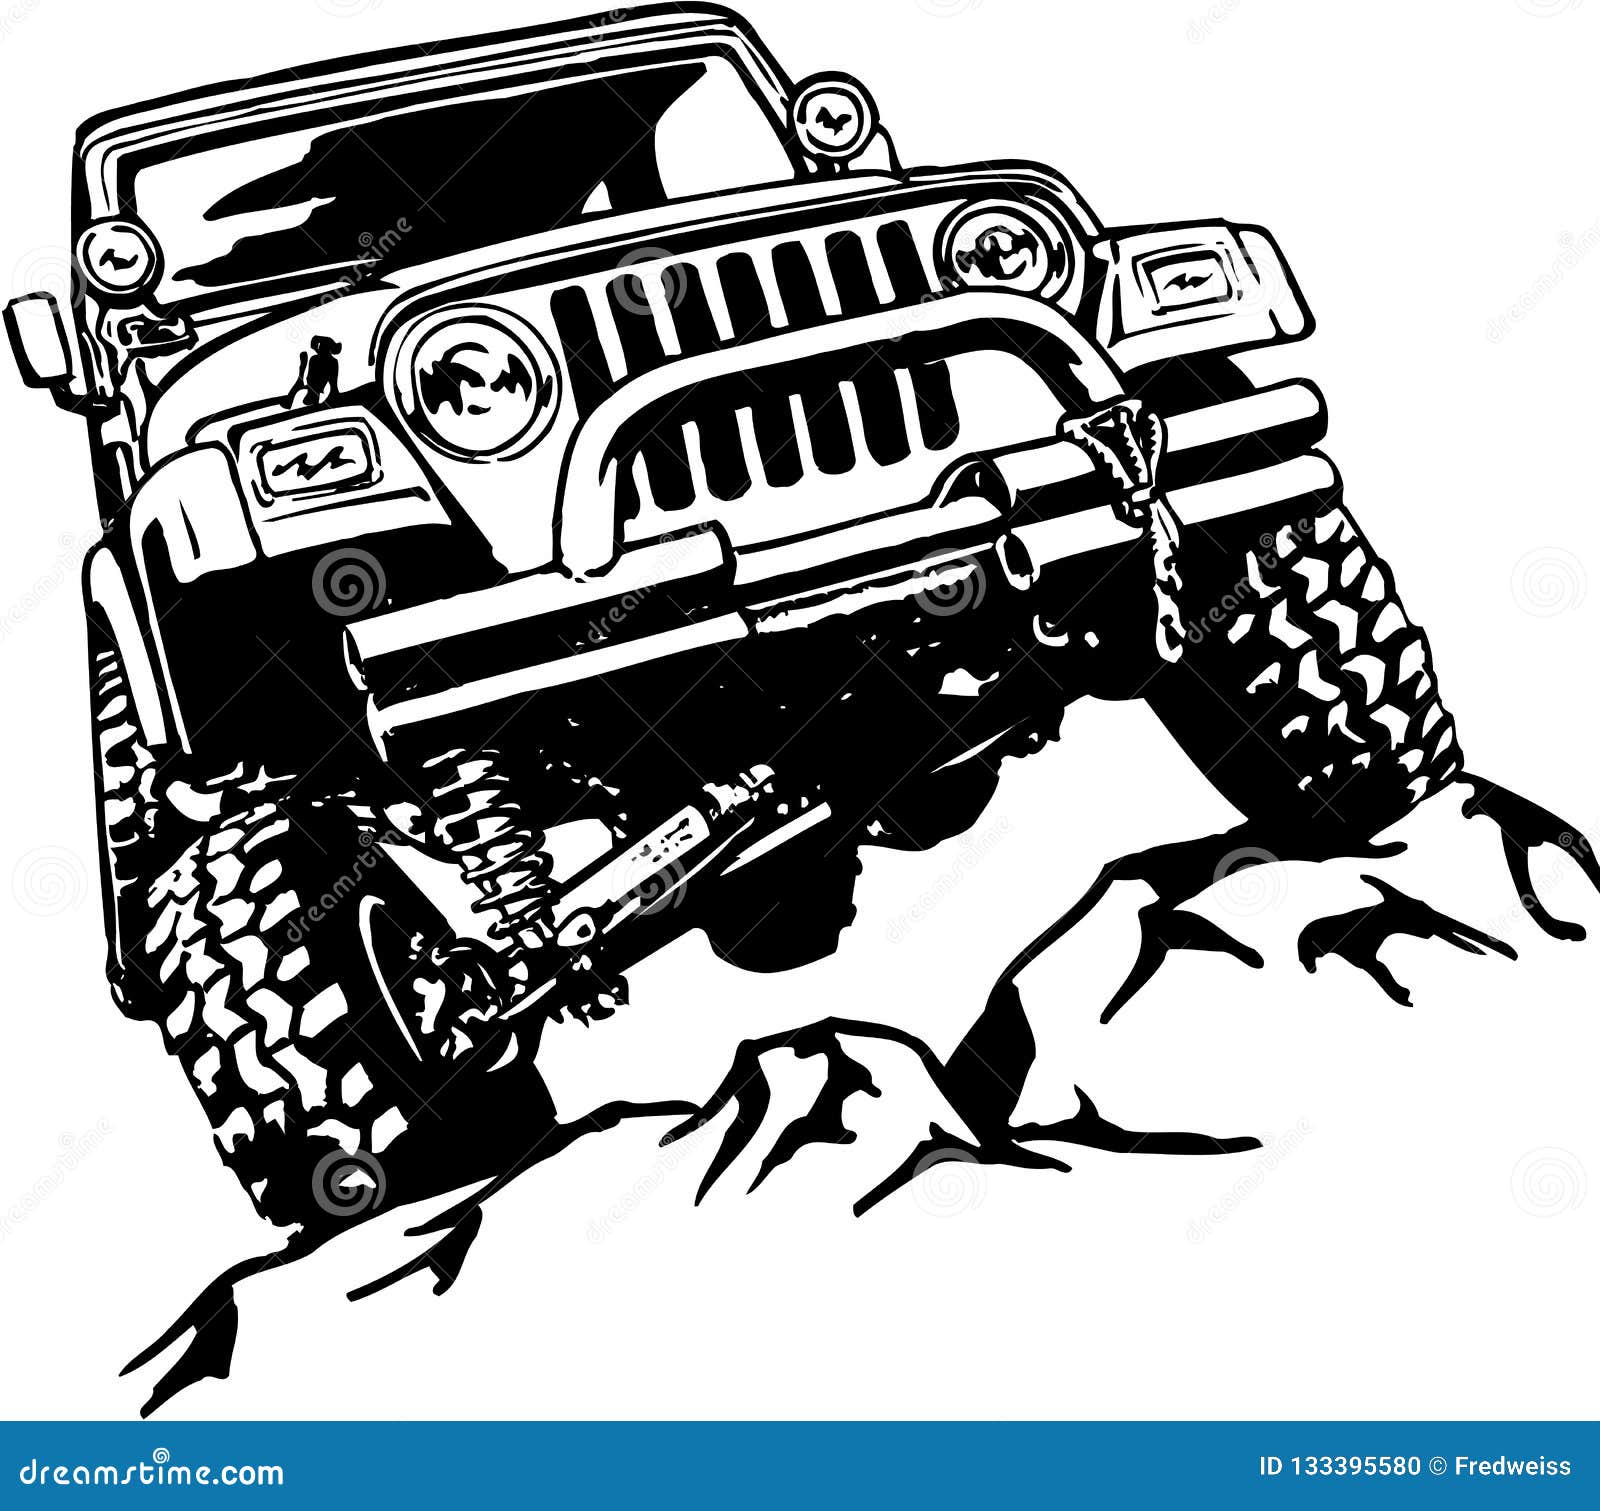 How to draw Jeep Wrangler Rubicon - Sketchok easy drawing guides